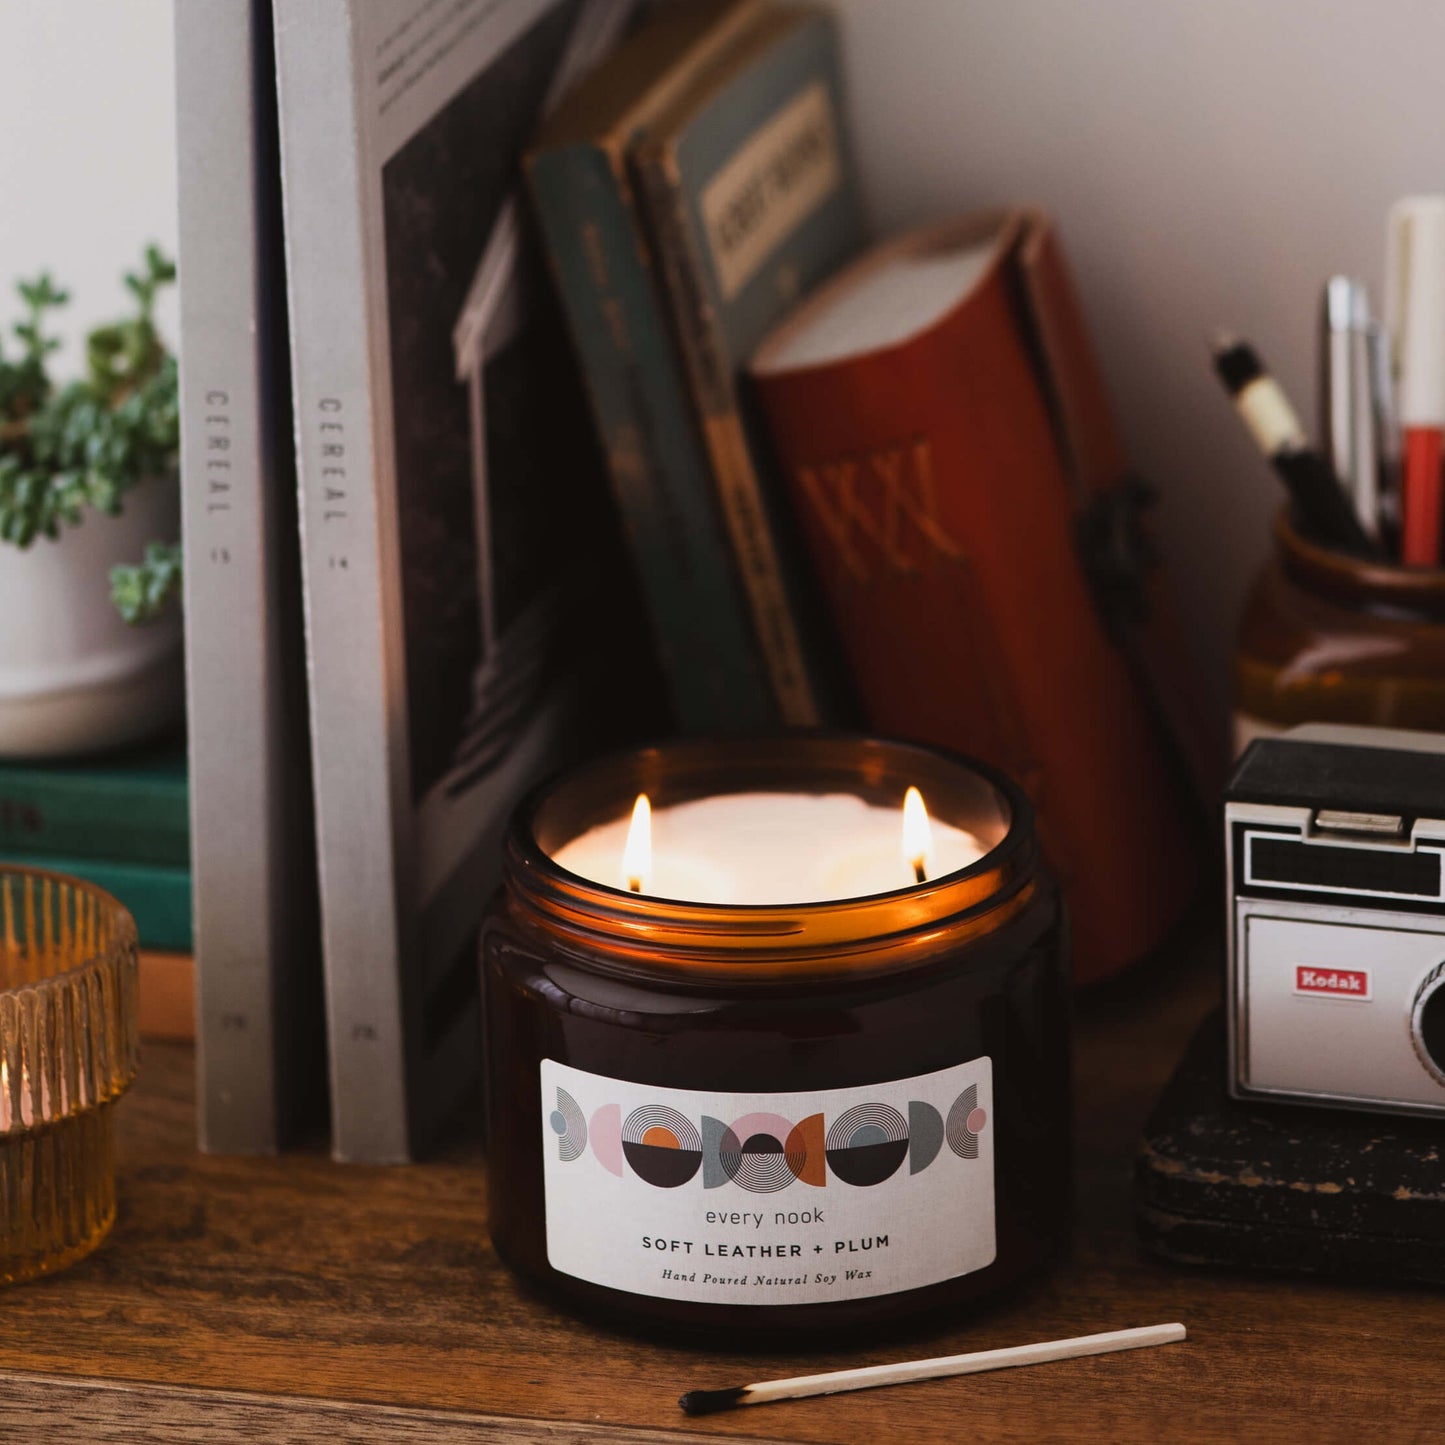 Soft Leather + Plum double wick scented candle